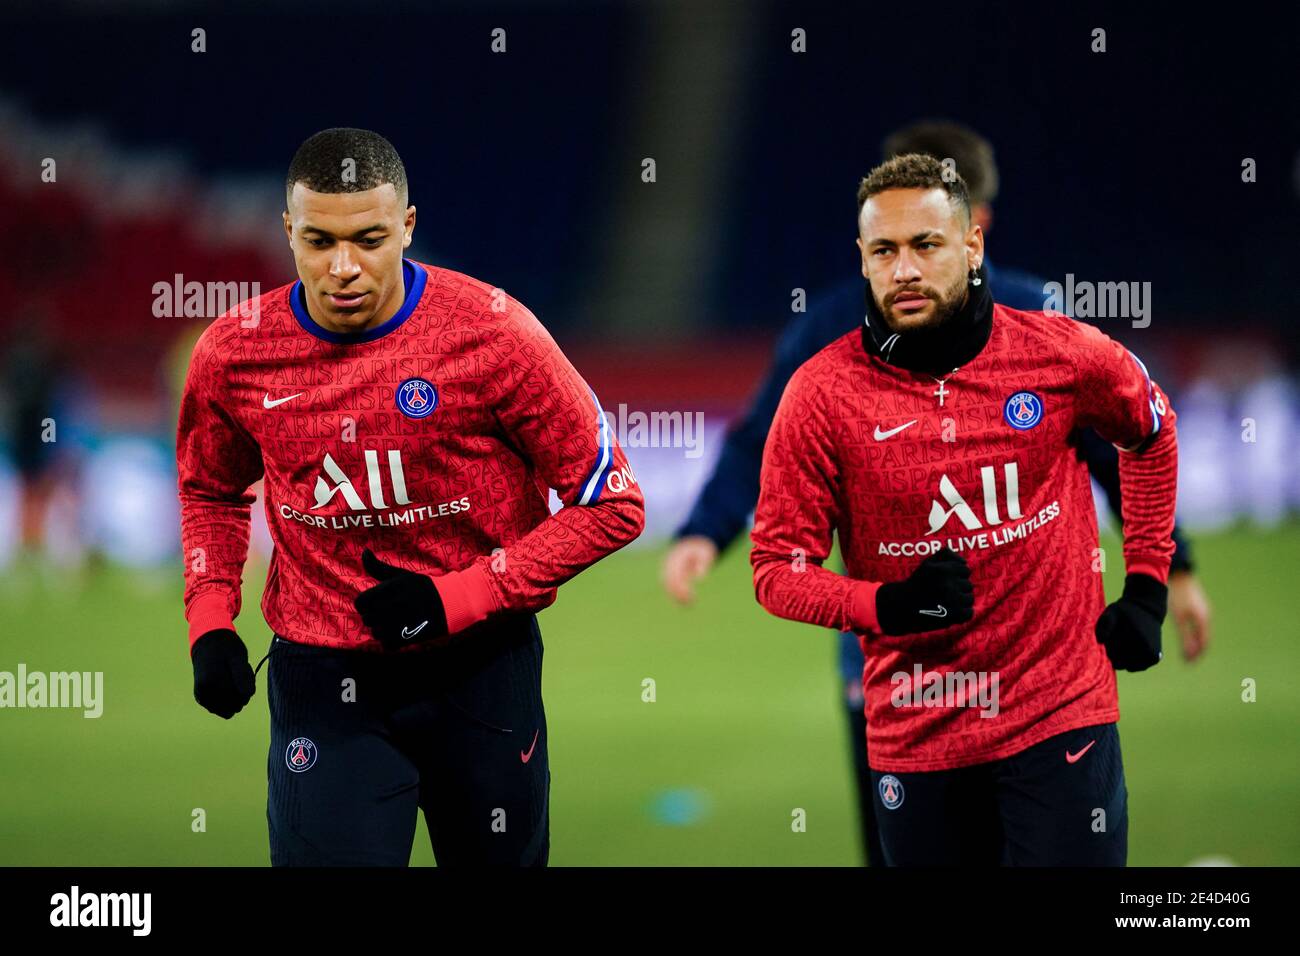 Kylian Mbappe And Neymar Jr Psg During The Warm Up Of The French Ligue 1 Paris Saint Germain Psg Vs Montpellier Mhsc Football Match At The Parc Des Prince In Paris France